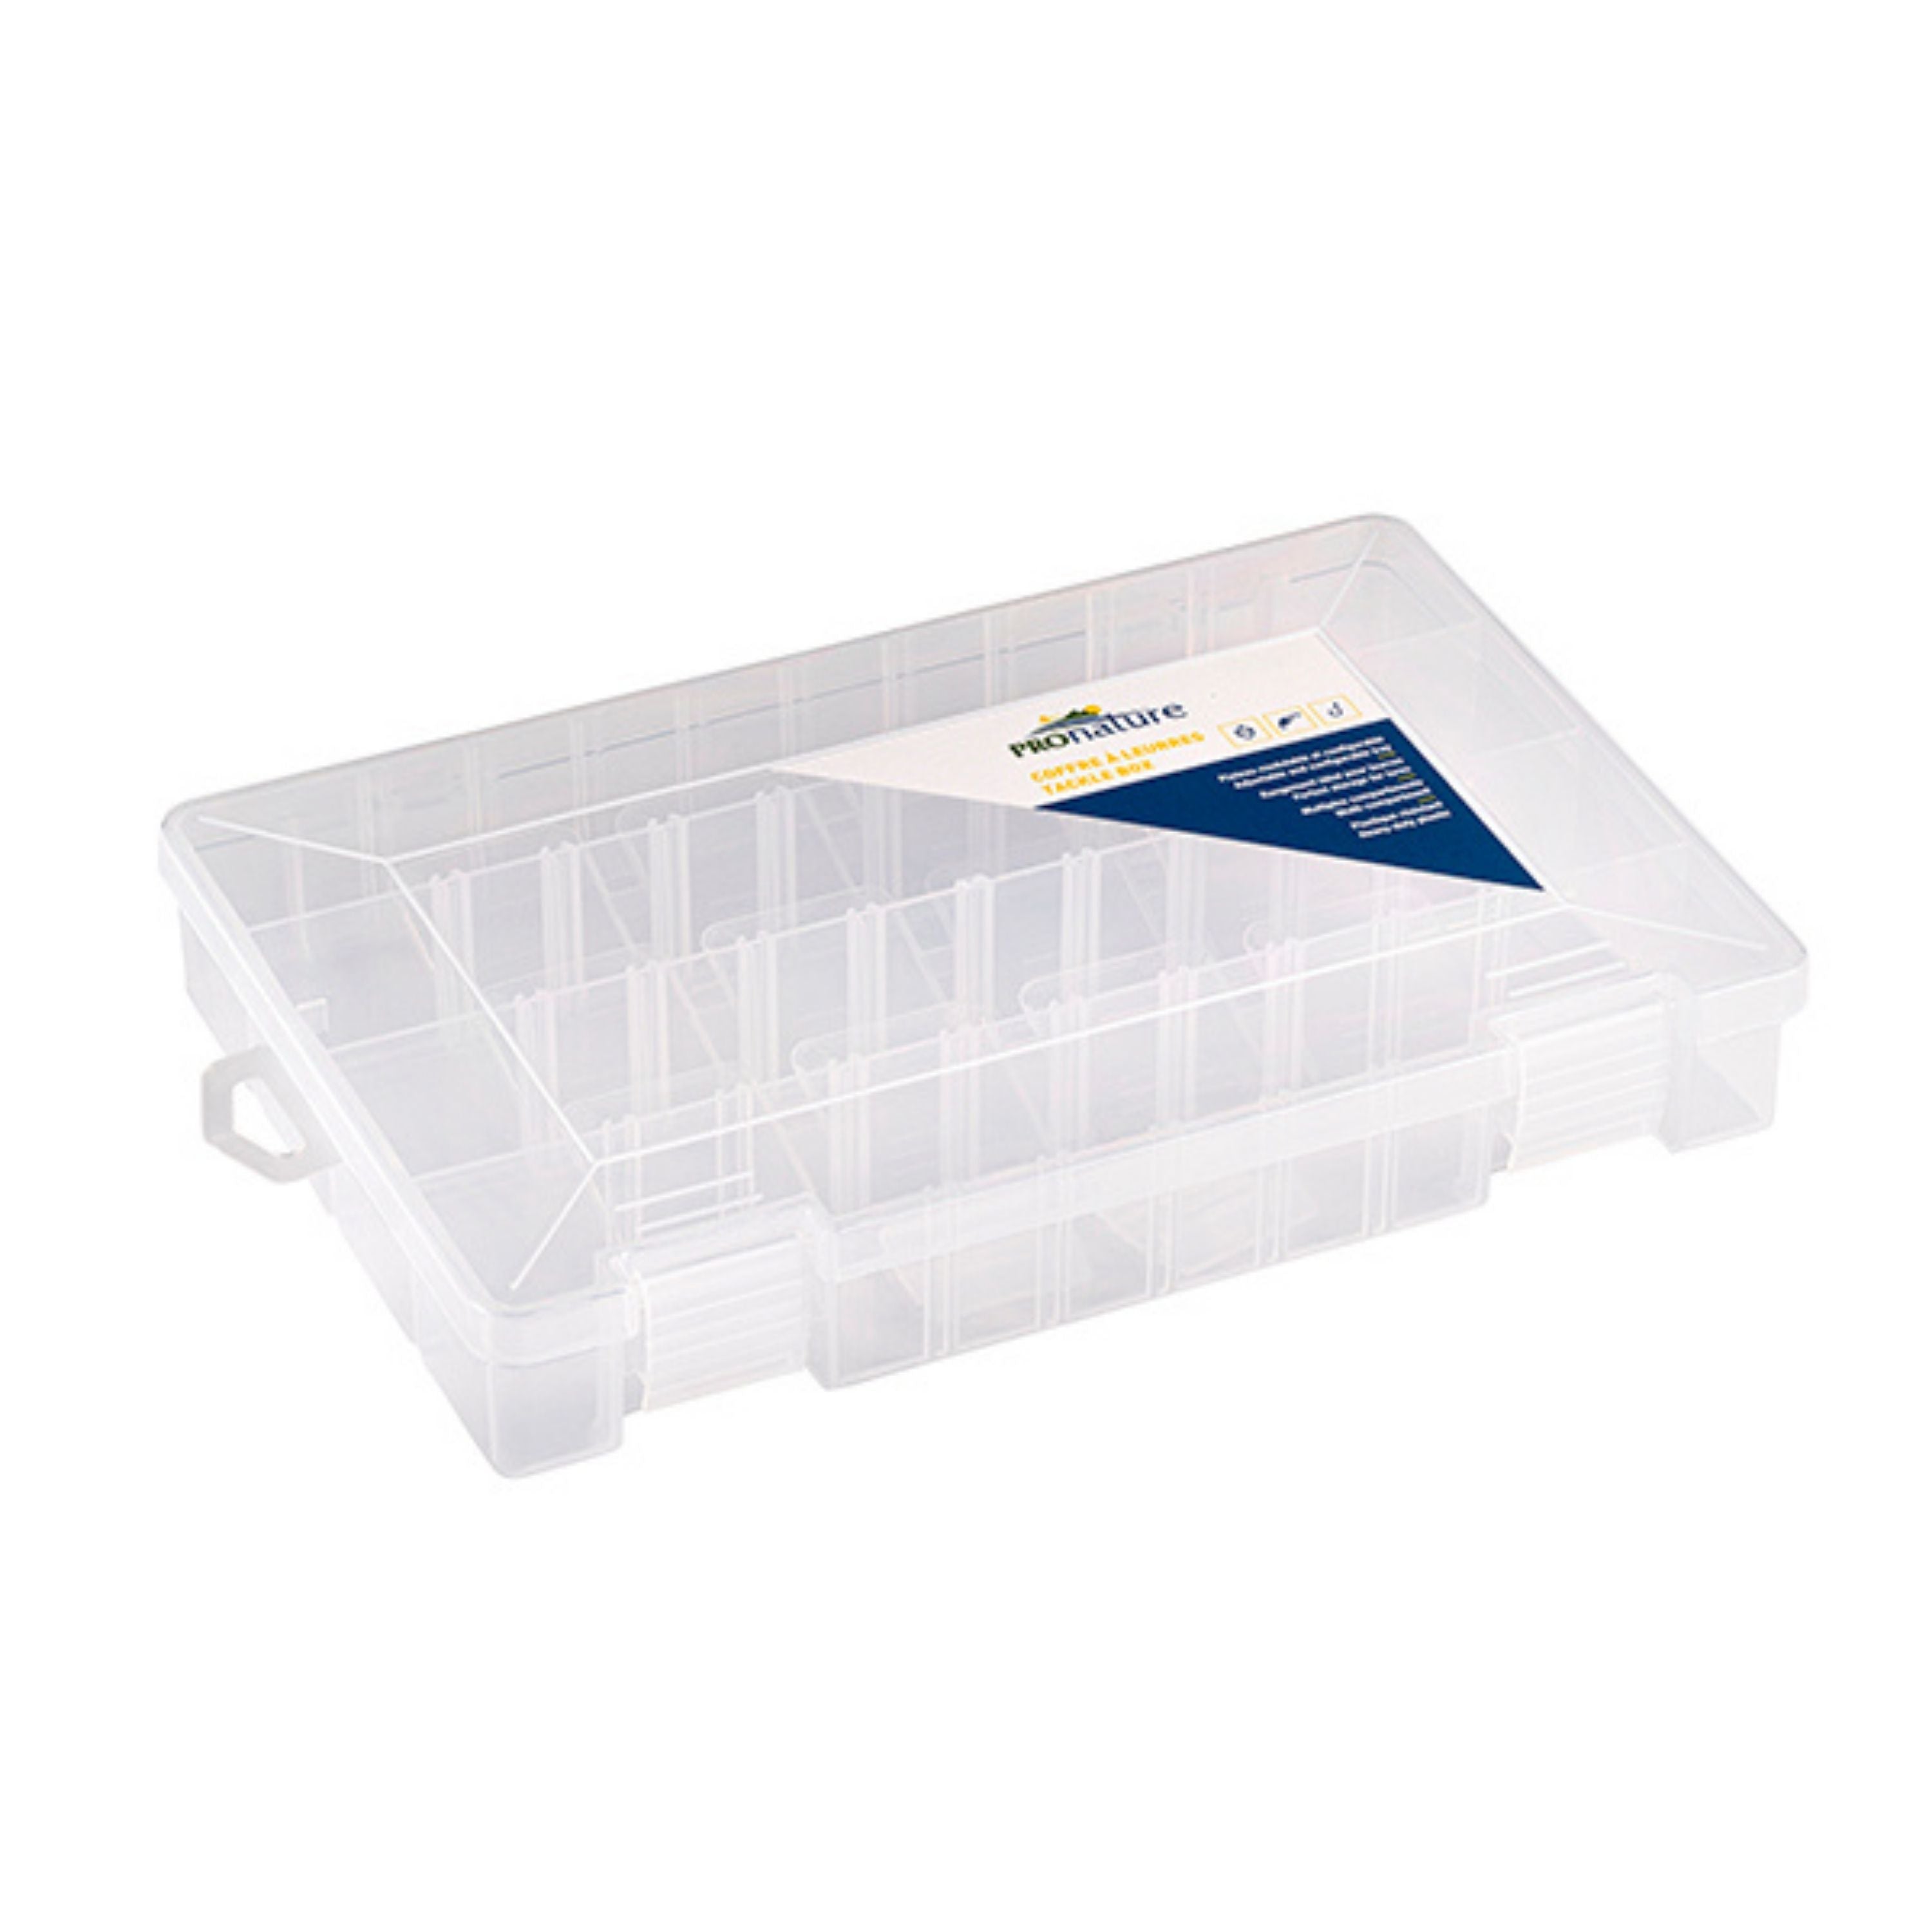 Small format tackle boxes